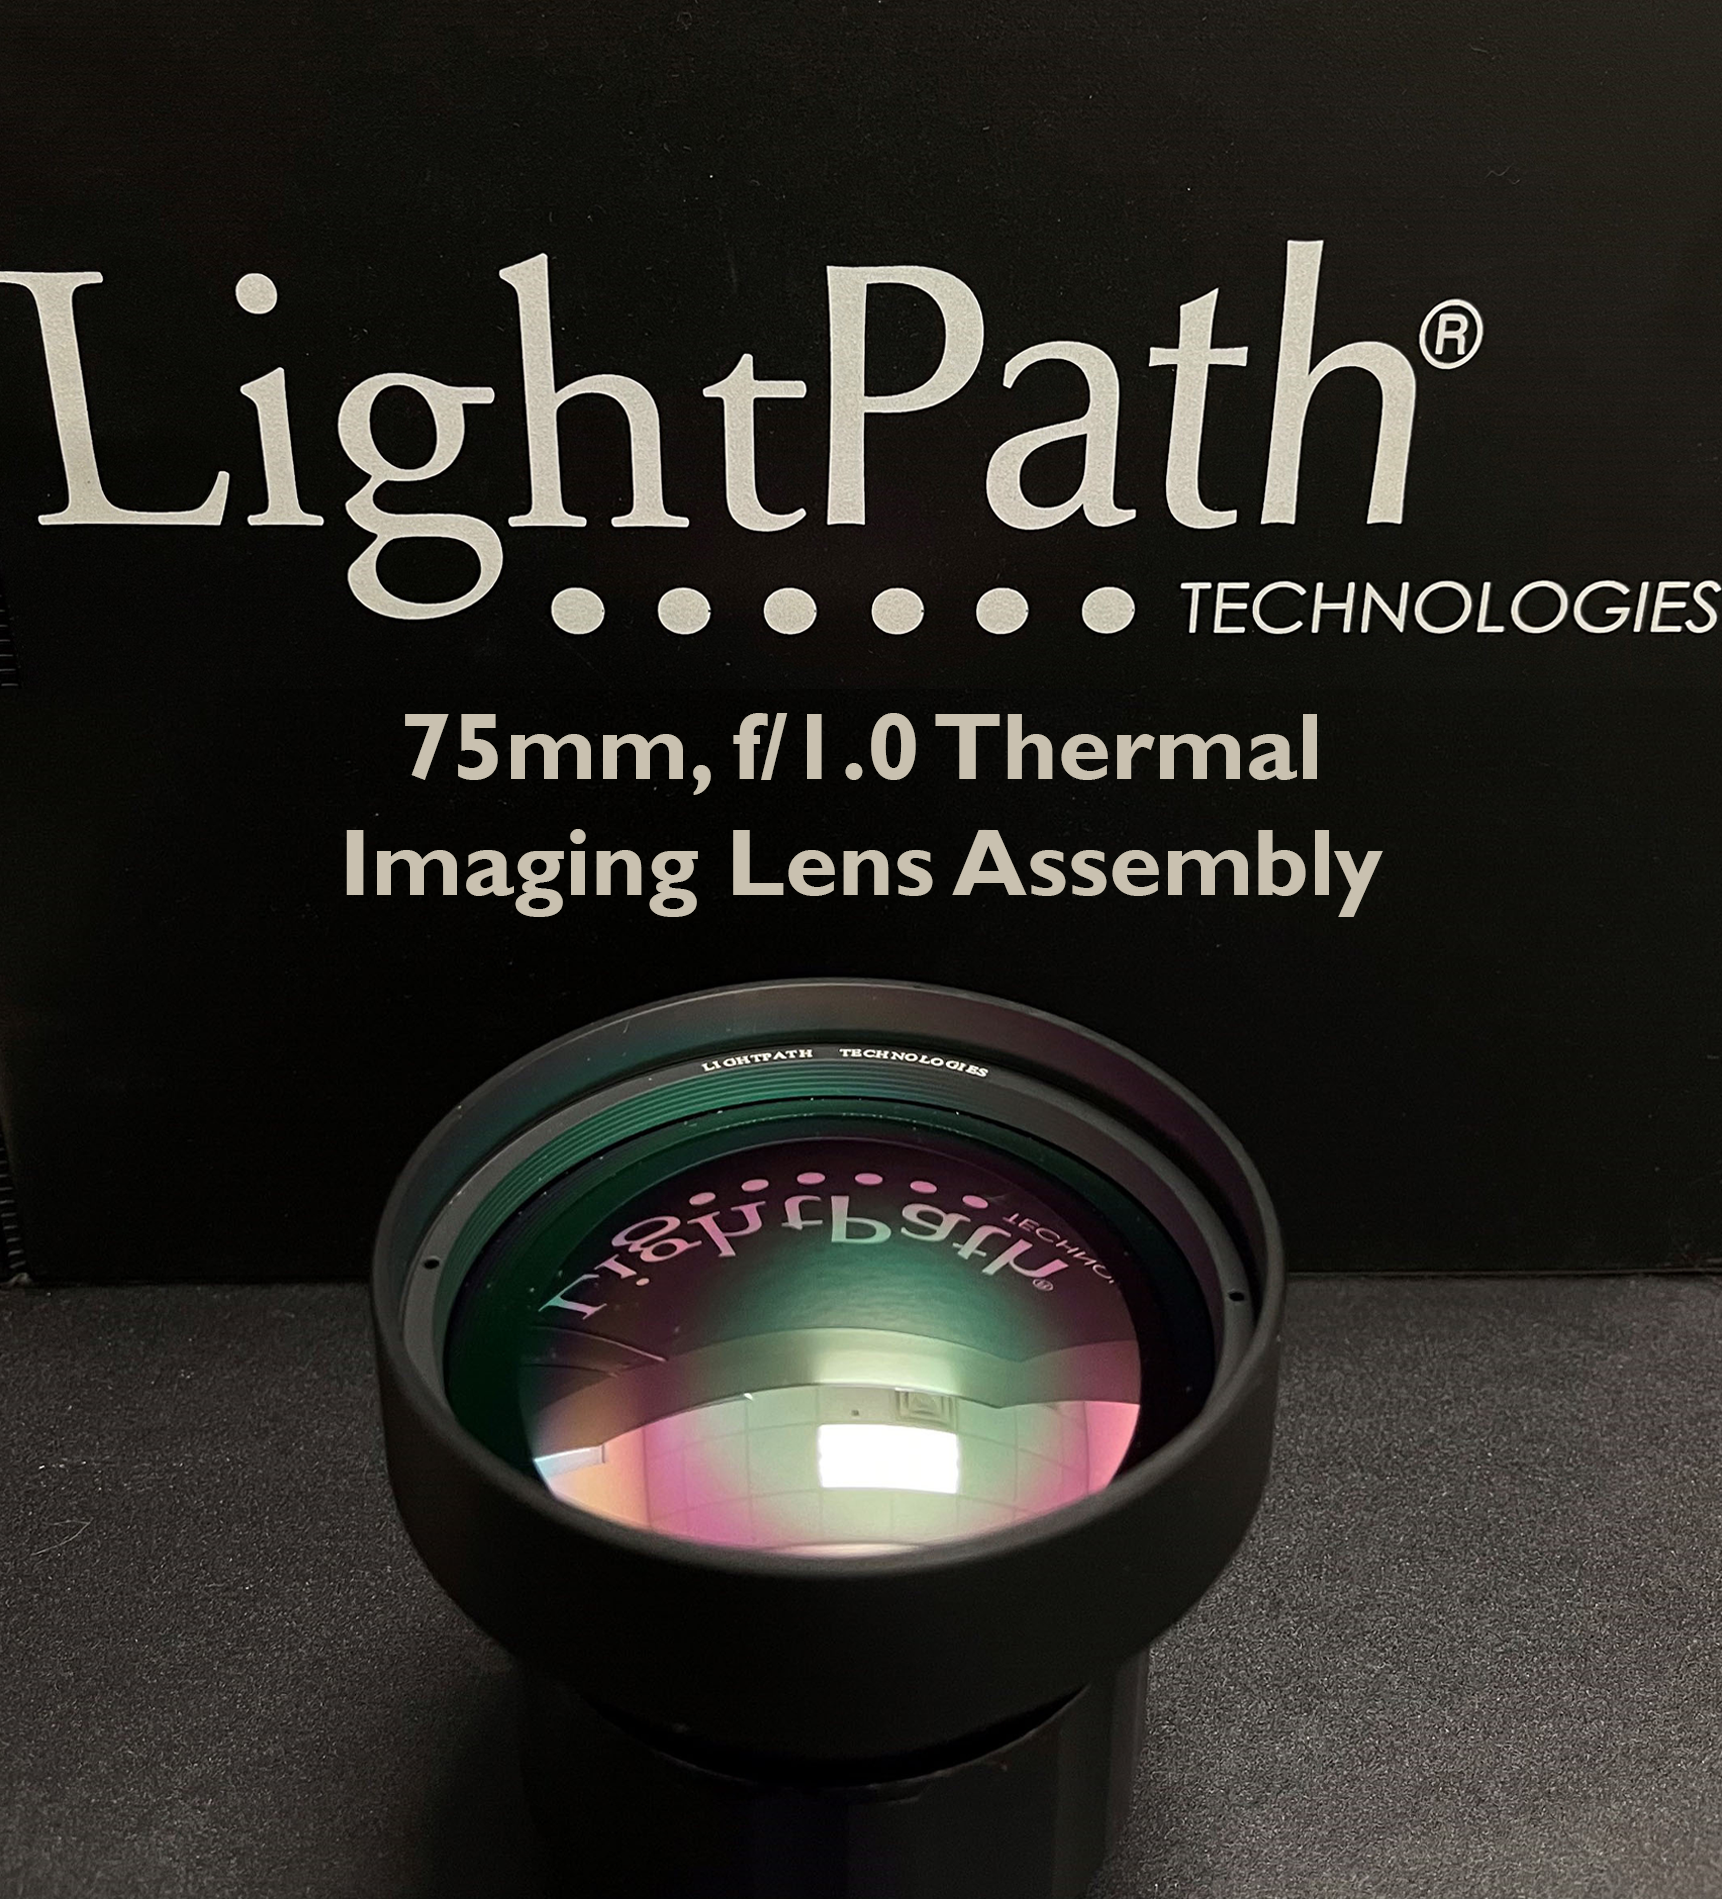 LightPath Technologies, Inc., Tuesday, January 19, 2021, Press release picture